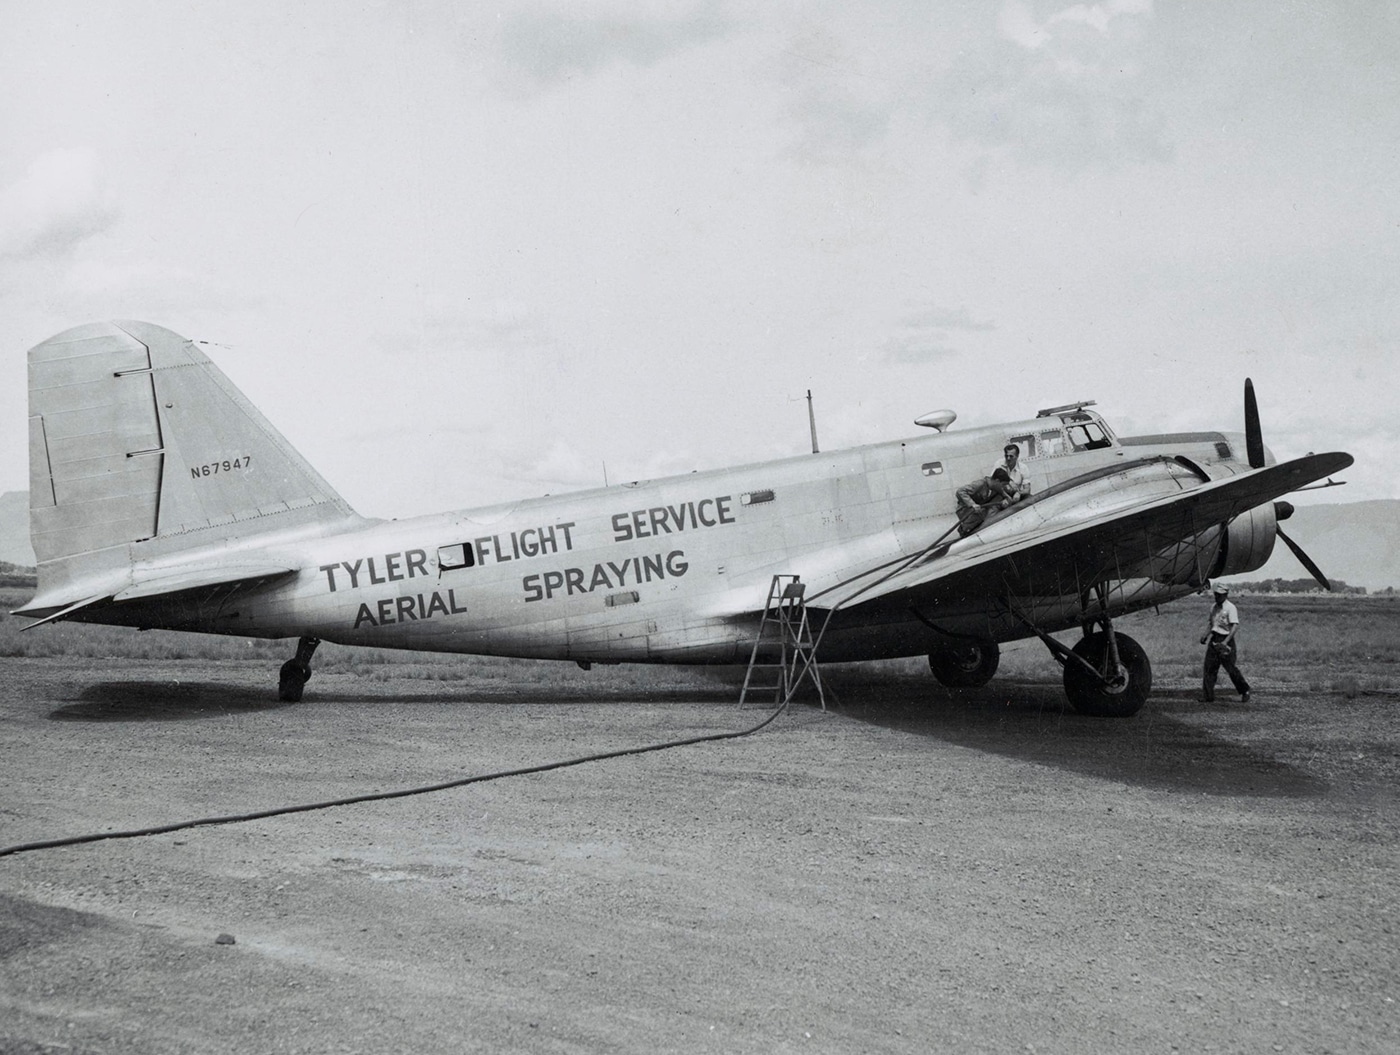 In this photograph, we see a post-WWII B-18 in civilian use. These planes were often used for cargo or crop spraying aircraft by commercial operators  - a much different position that its role in 1943. This one sprayed DDT. Dichlorodiphenyltrichloroethane, commonly known as DDT, is a colorless, tasteless, and almost odorless crystalline chemical compound, an organochloride. Originally developed as an insecticide, it became infamous for its environmental impacts. DDT was first synthesized in 1874 by the Austrian chemist Othmar Zeidler. DDT's insecticidal action was discovered by the Swiss chemist Paul Hermann Müller in 1939.